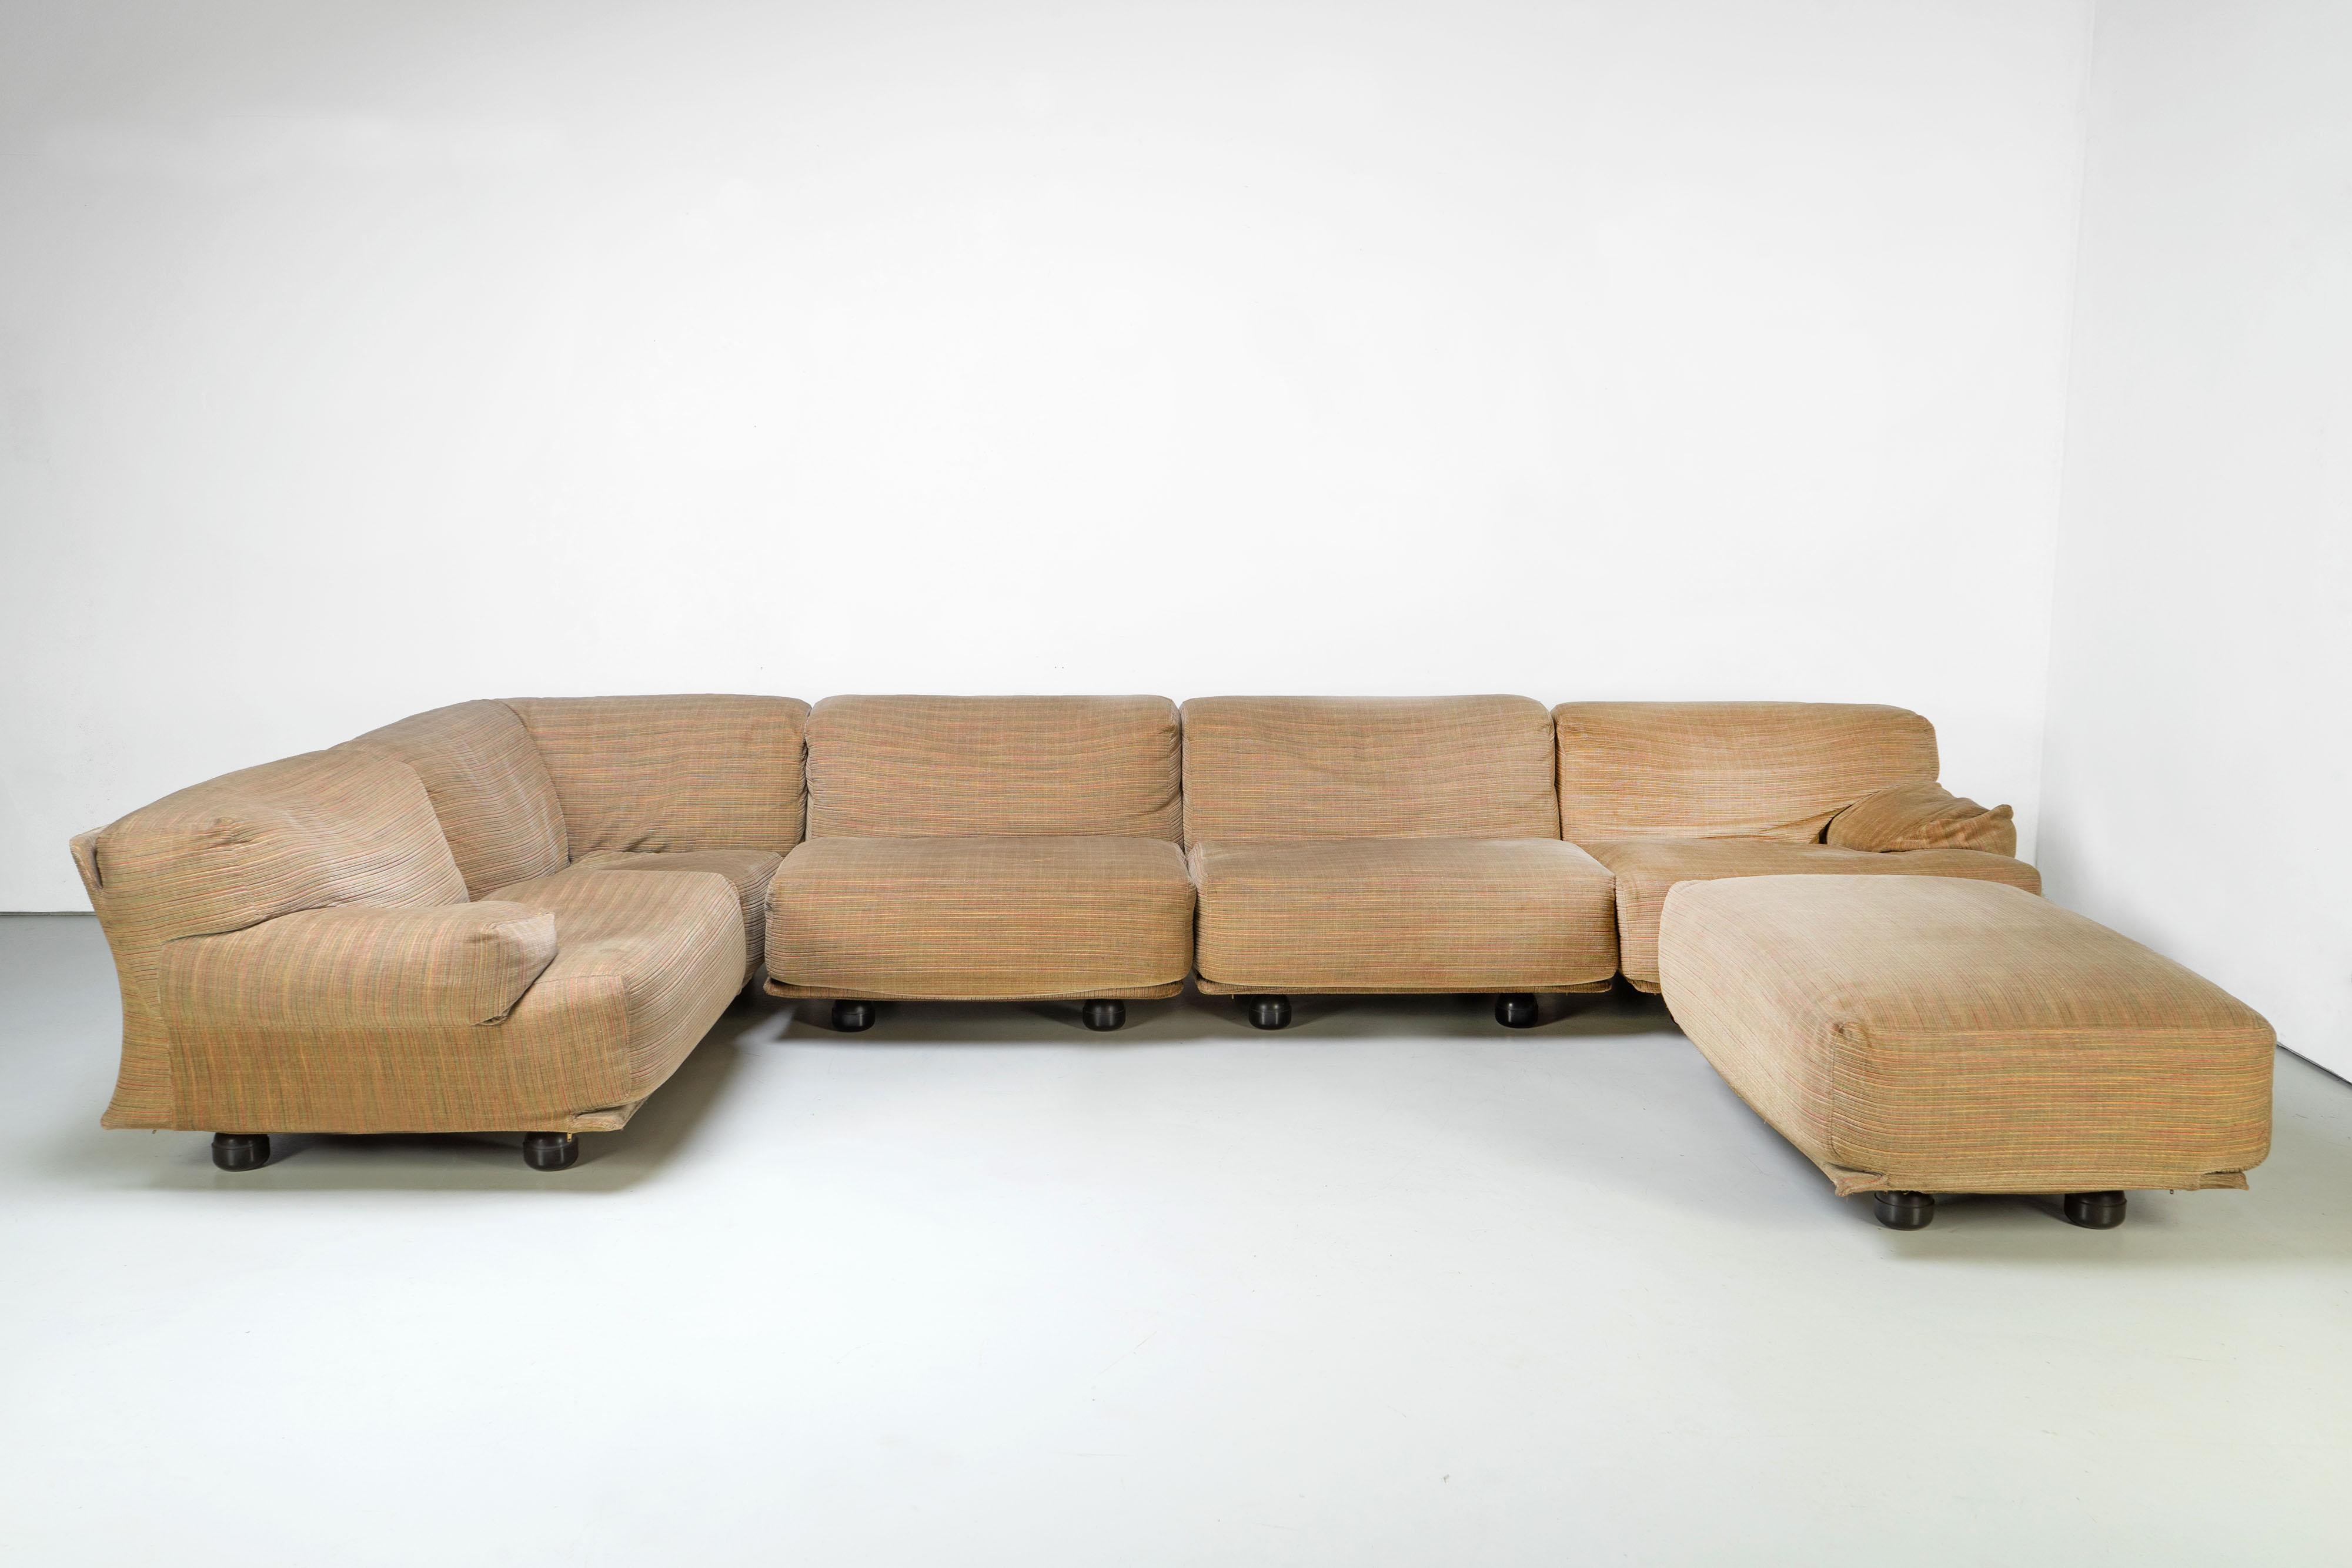 Seating group by Cassina from the 1970s, consisting of five sofa elements and a large pouf. The sofa parts are 90 cm wide and 90 cm deep, the pouf measures 75 cm by 110 cm. Very good original condition, fabric has been professionally cleaned.